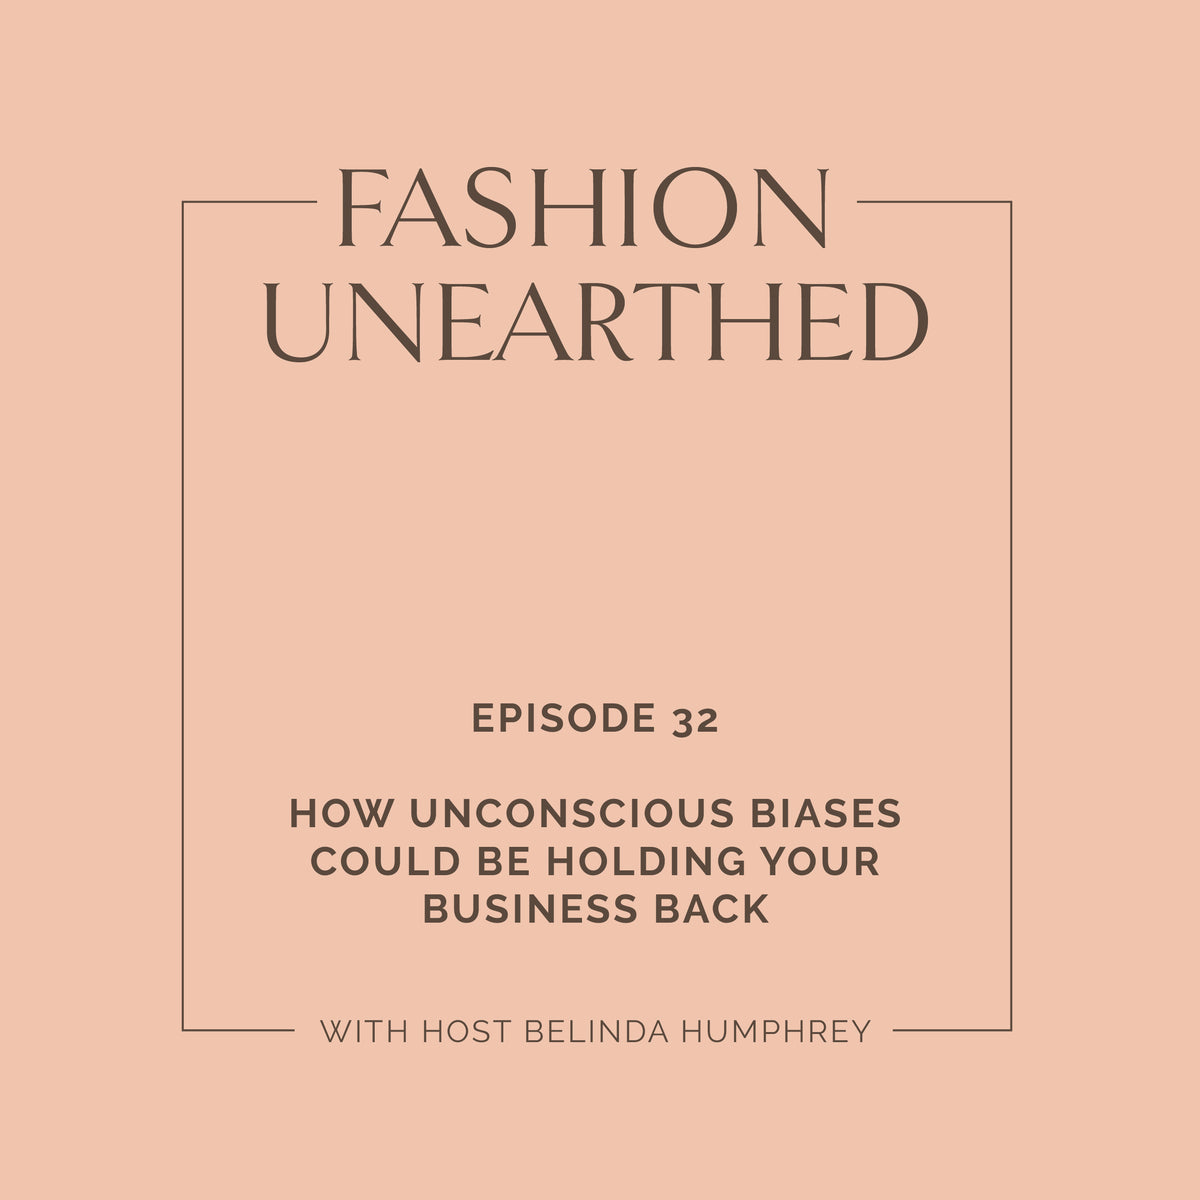 Episode 32: How unconscious biases could be holding your business back